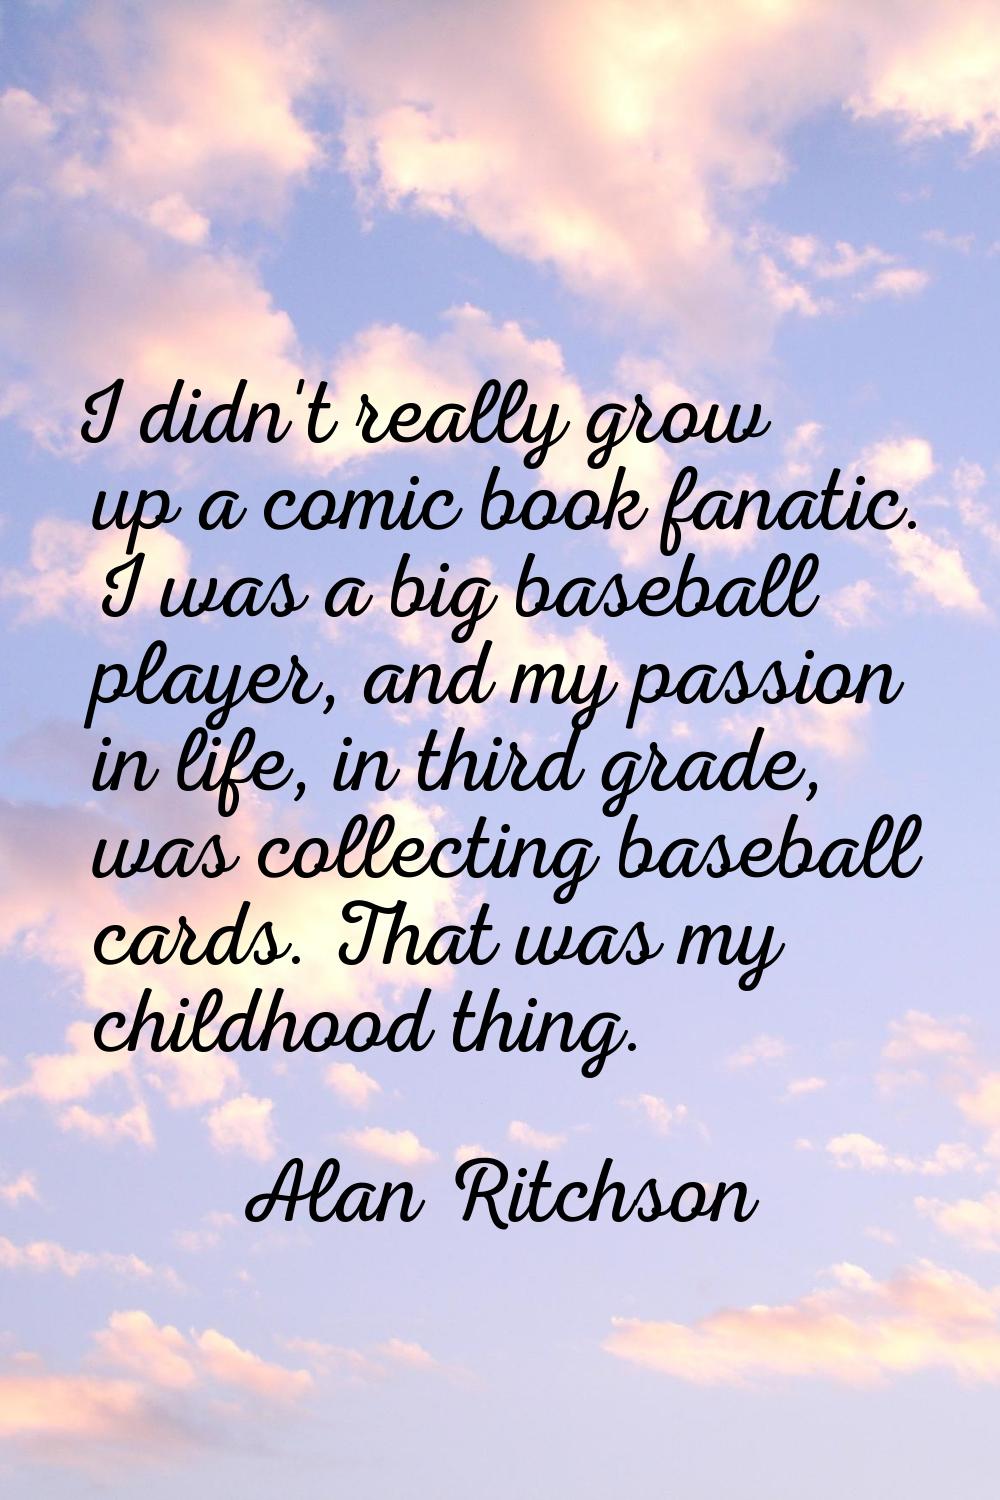 I didn't really grow up a comic book fanatic. I was a big baseball player, and my passion in life, 